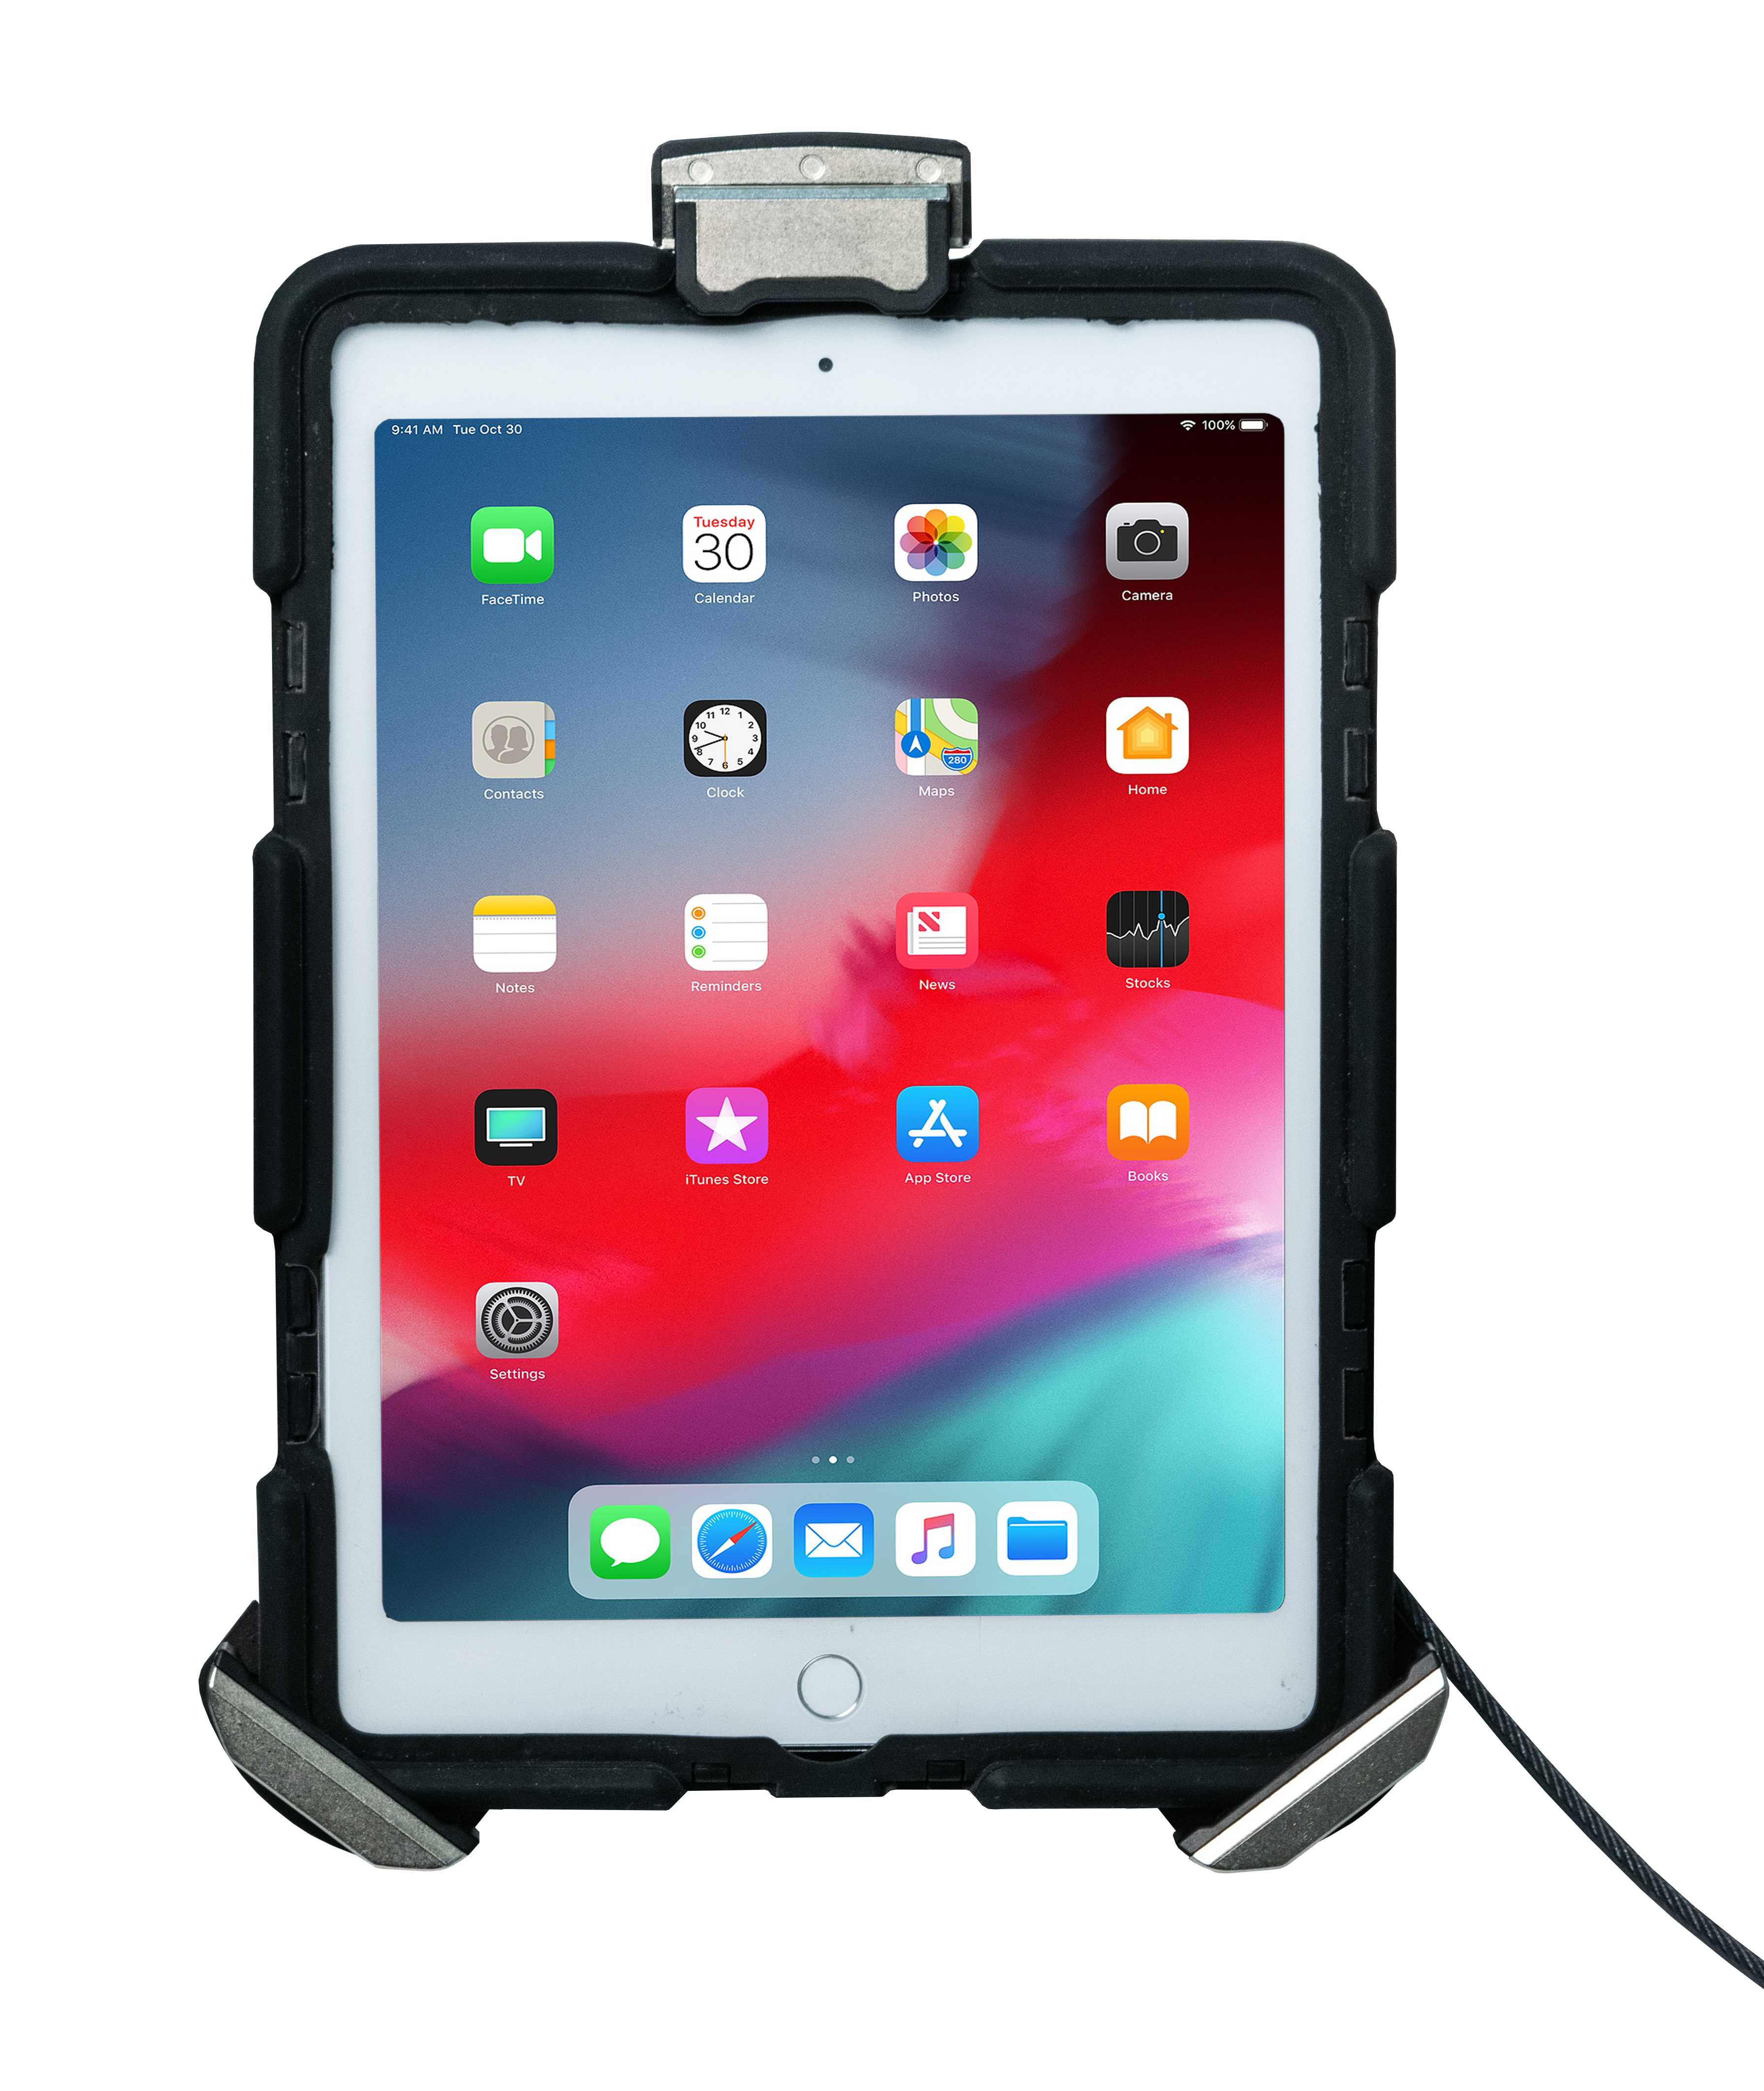 Tri-Grip Tablet Security Clasp with Quick-Connect VESA Mount for 7-13 inch tablets, including iPad 10.2-inch (7th/ 8th/ 9th Gen.)